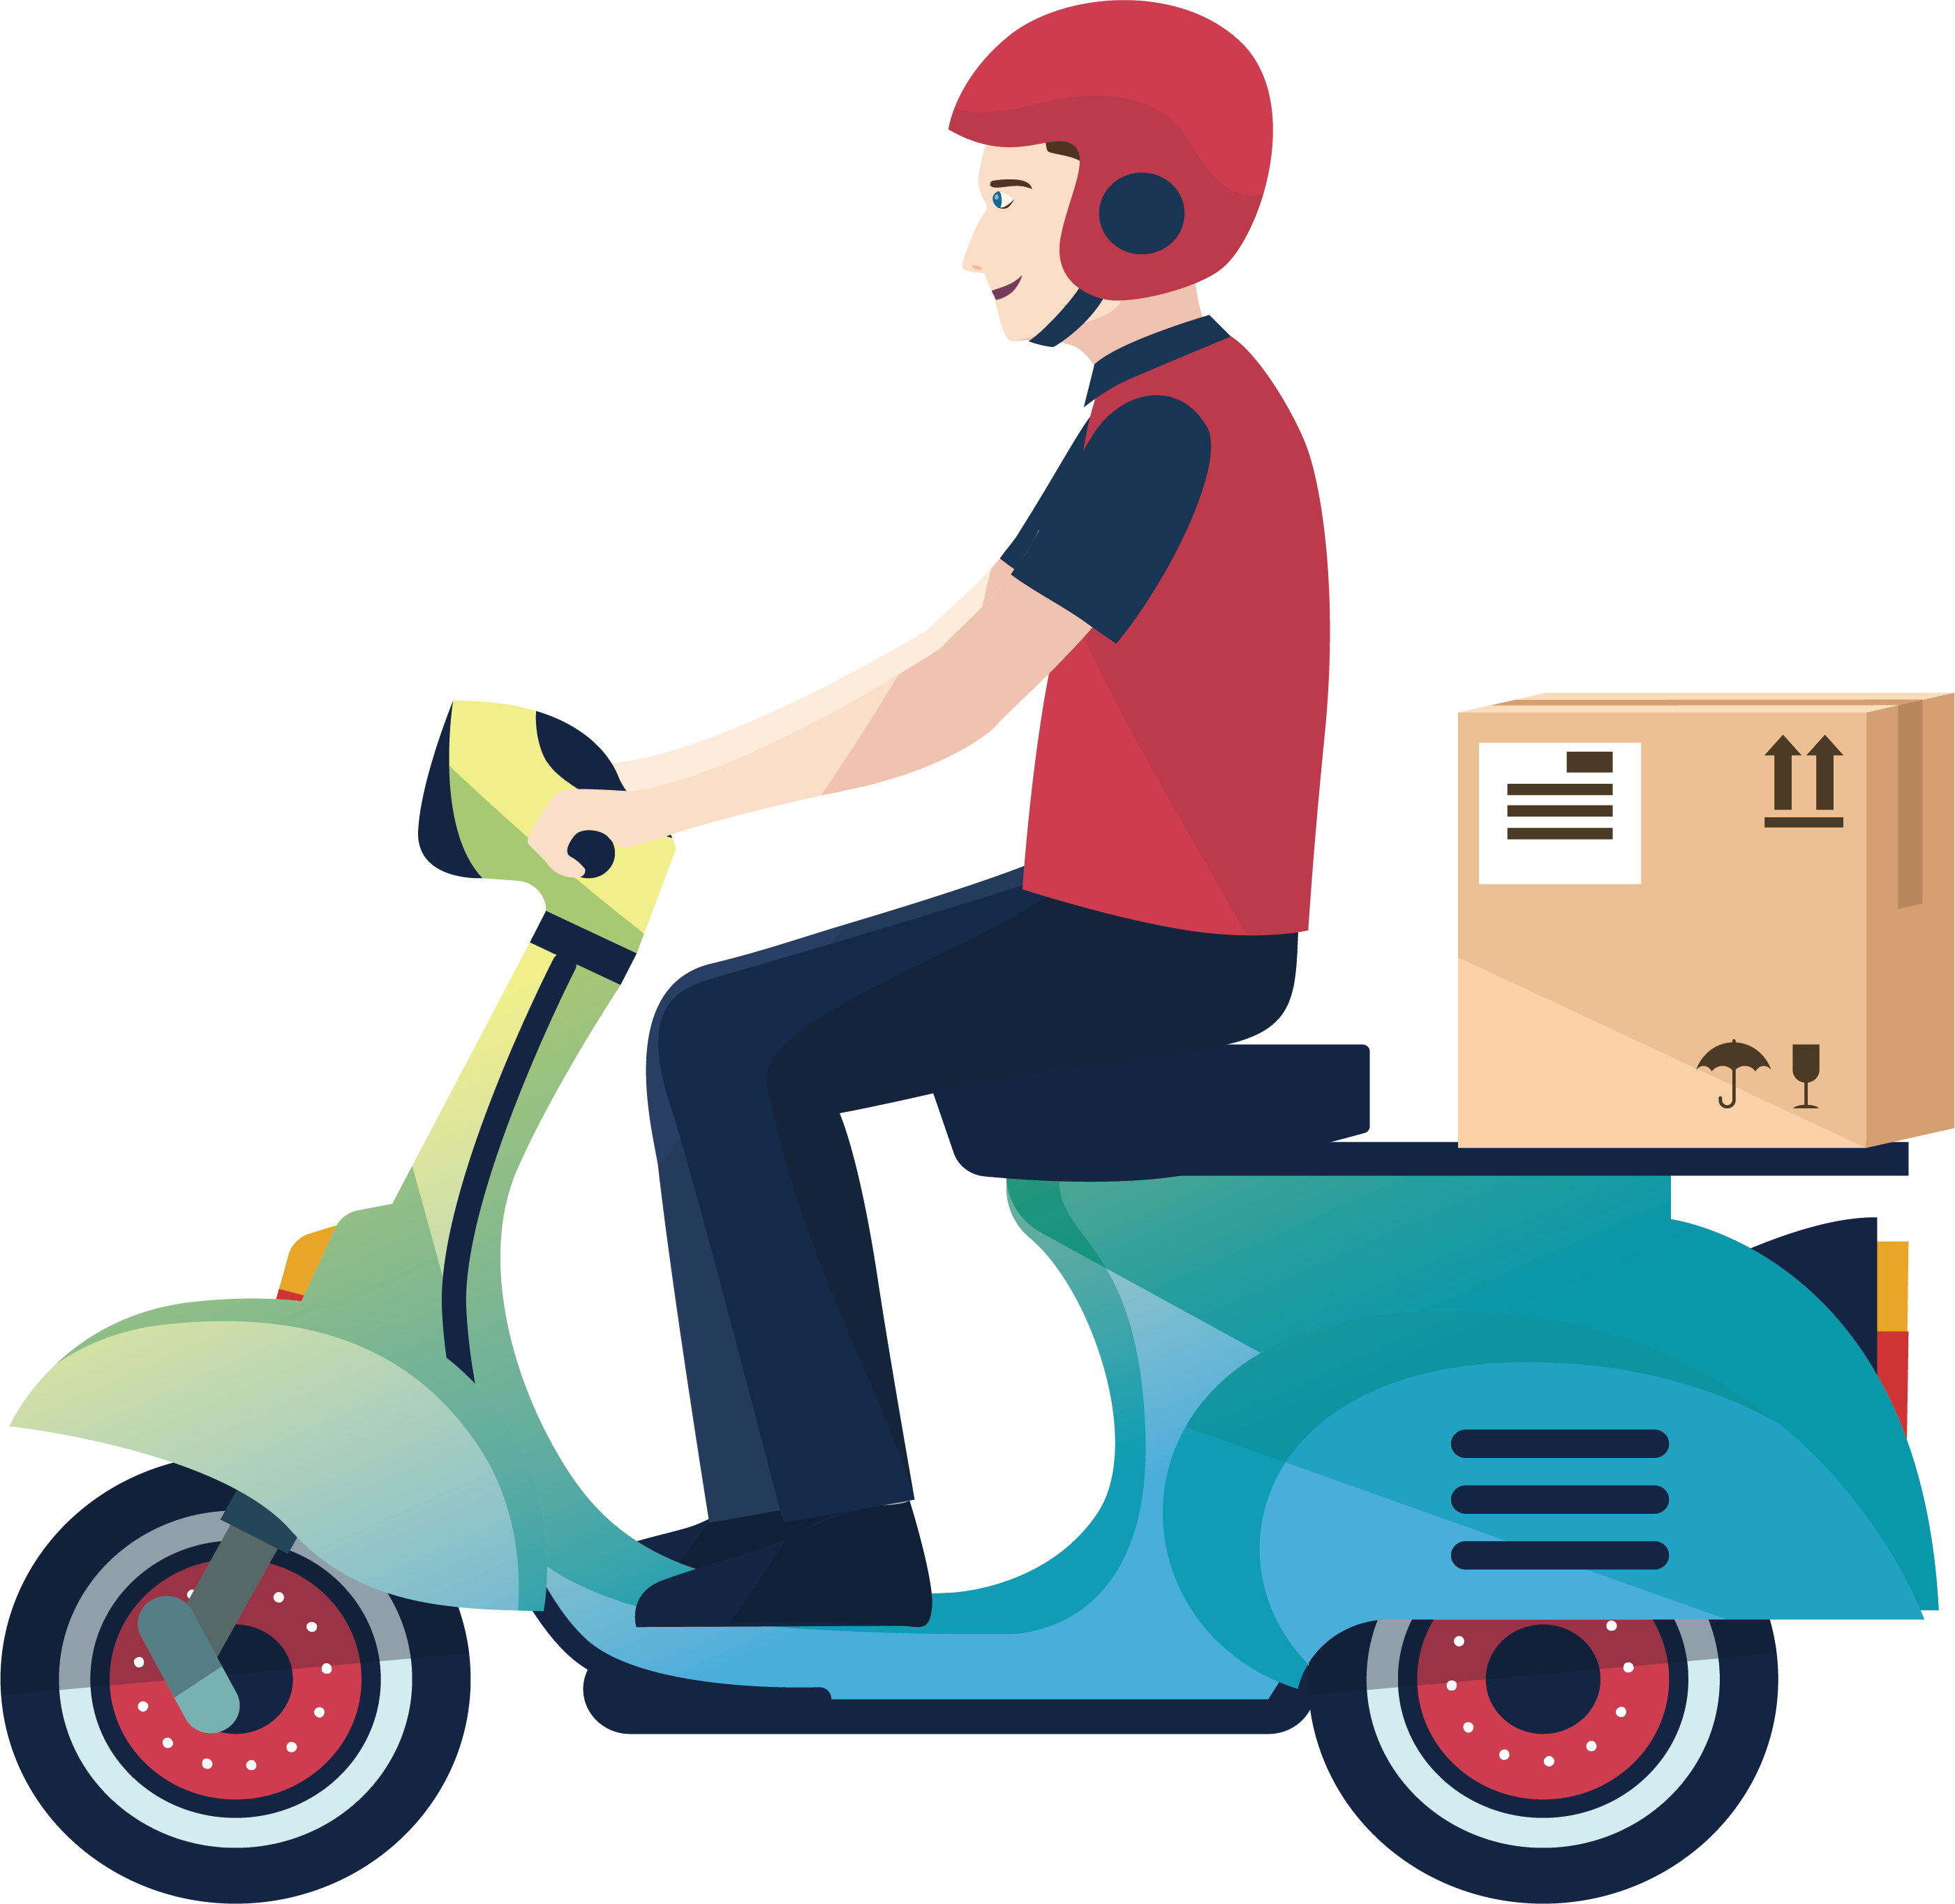 A Man Riding A Scooter With A Box On It